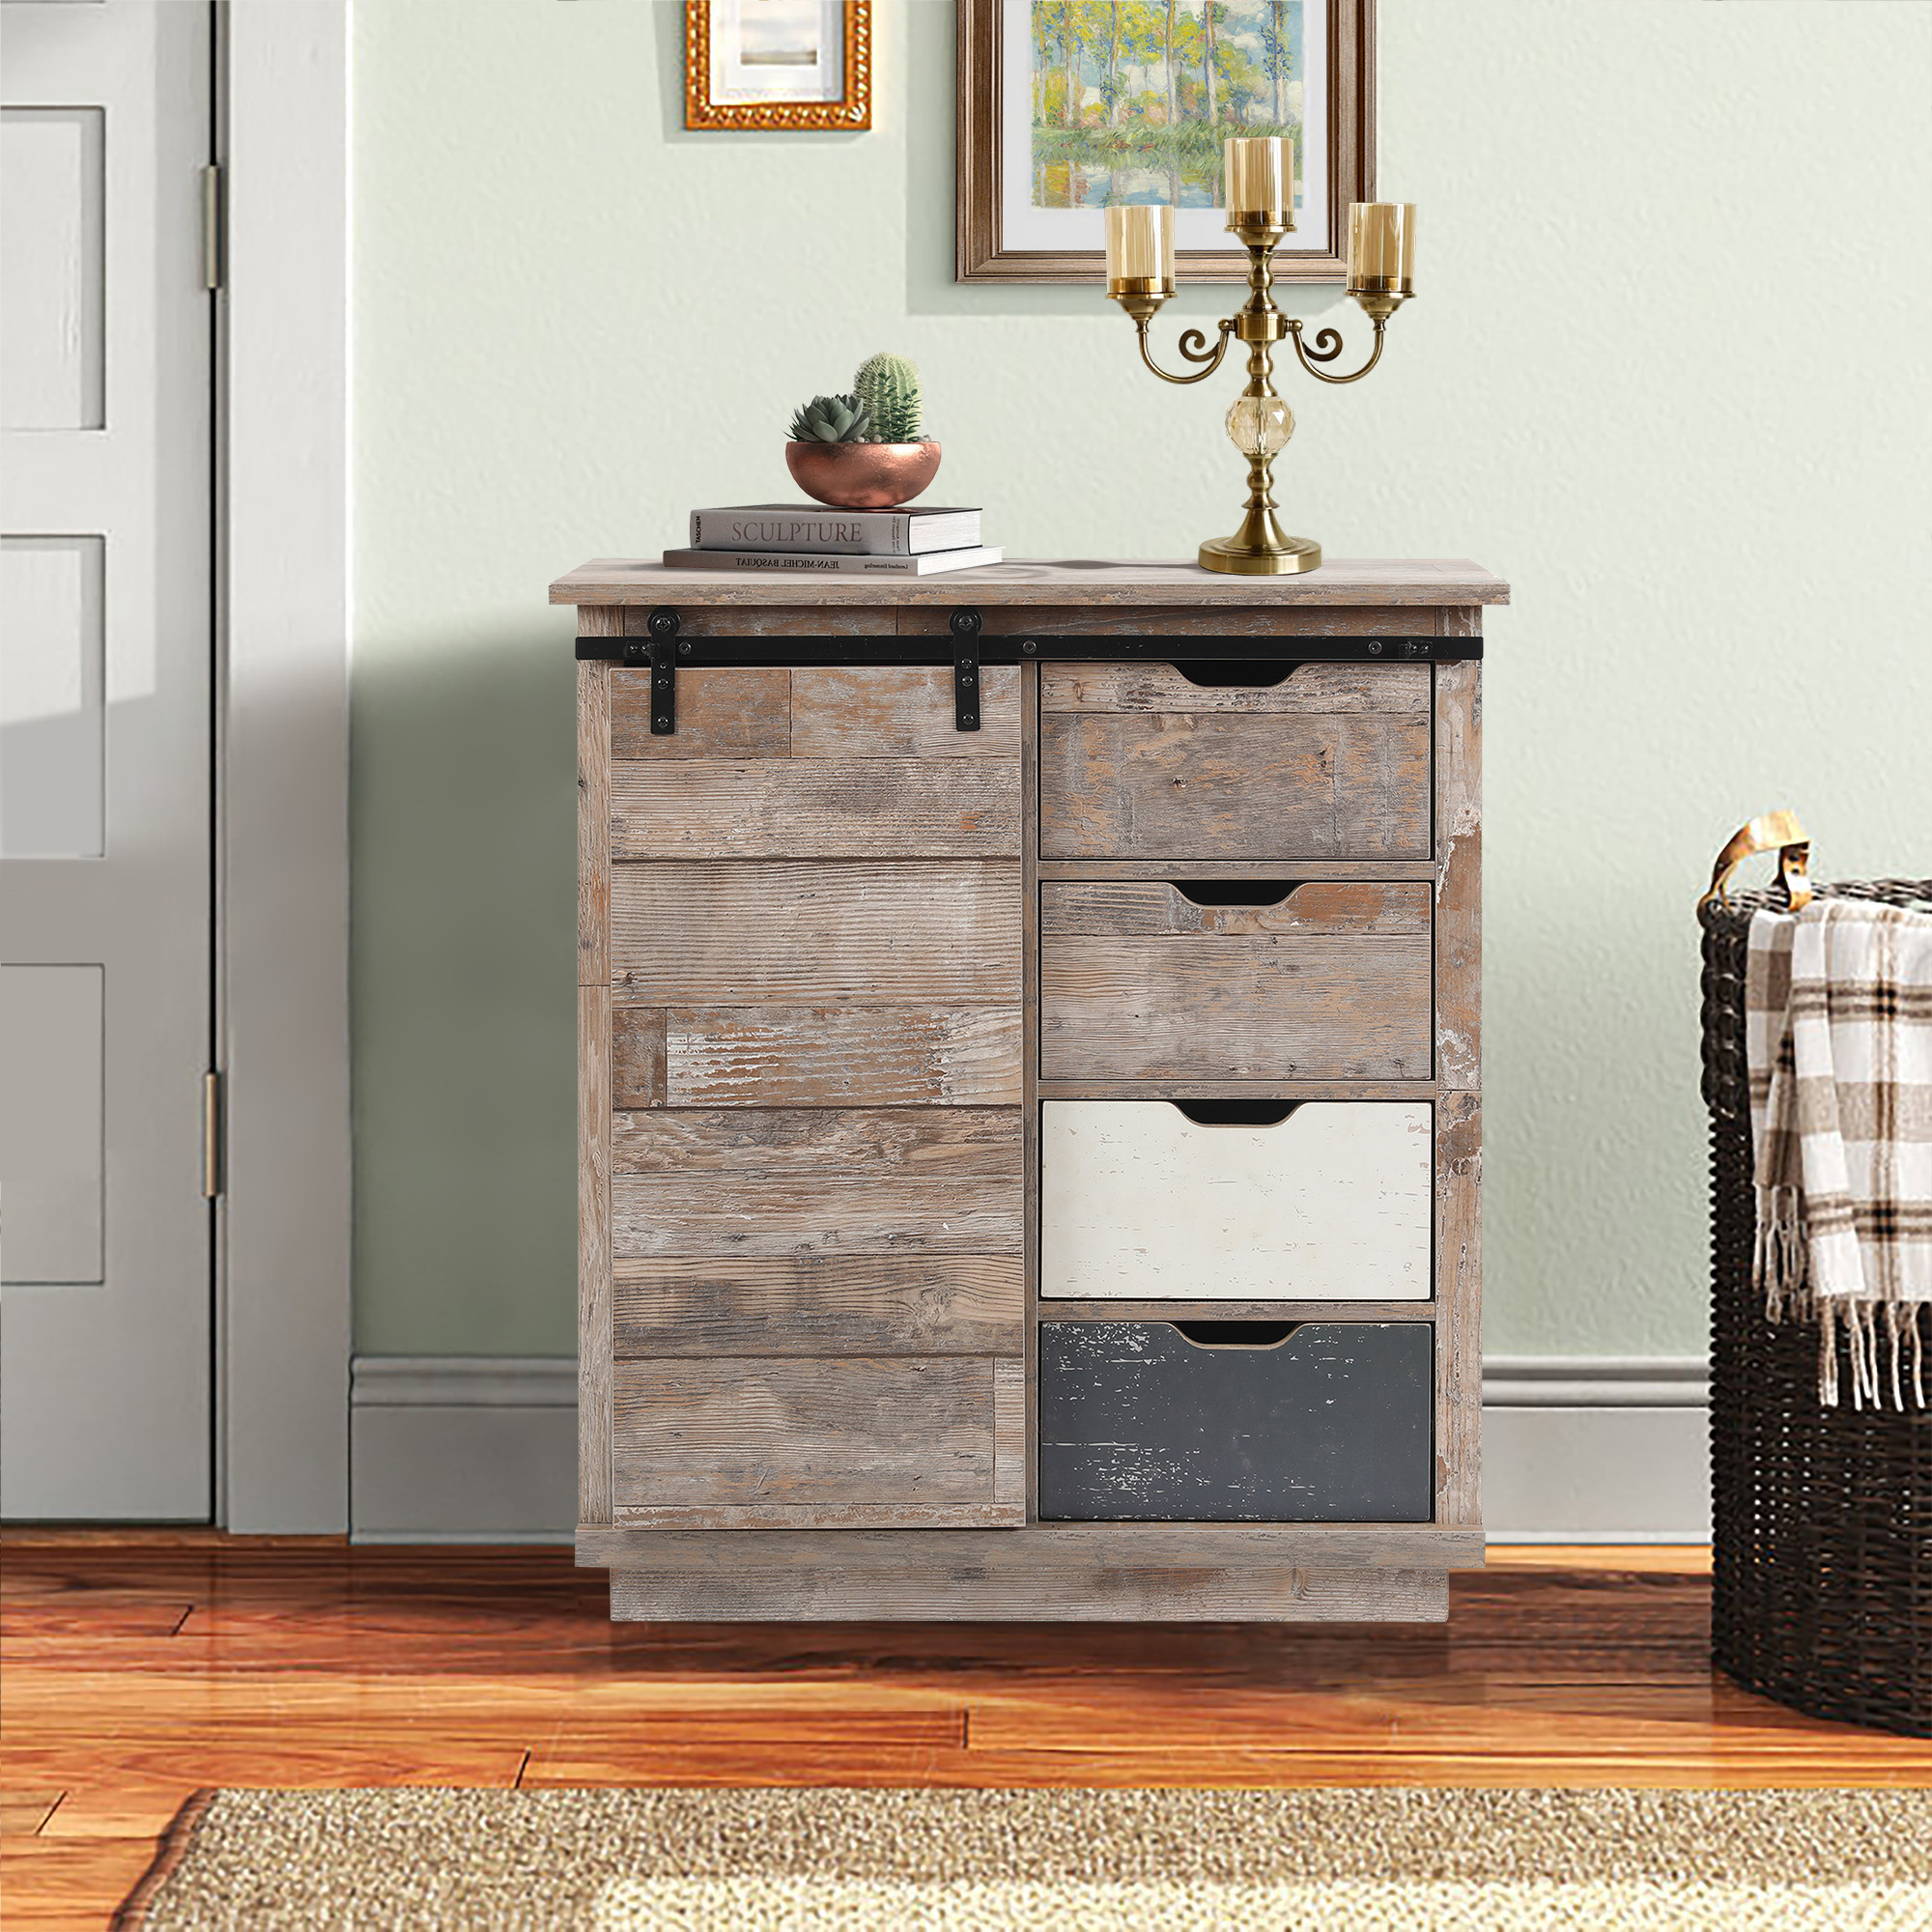 Whif962 31.5 X 34.8 X 13.4 In. Rustic Sliding One Door Wood Cabinet